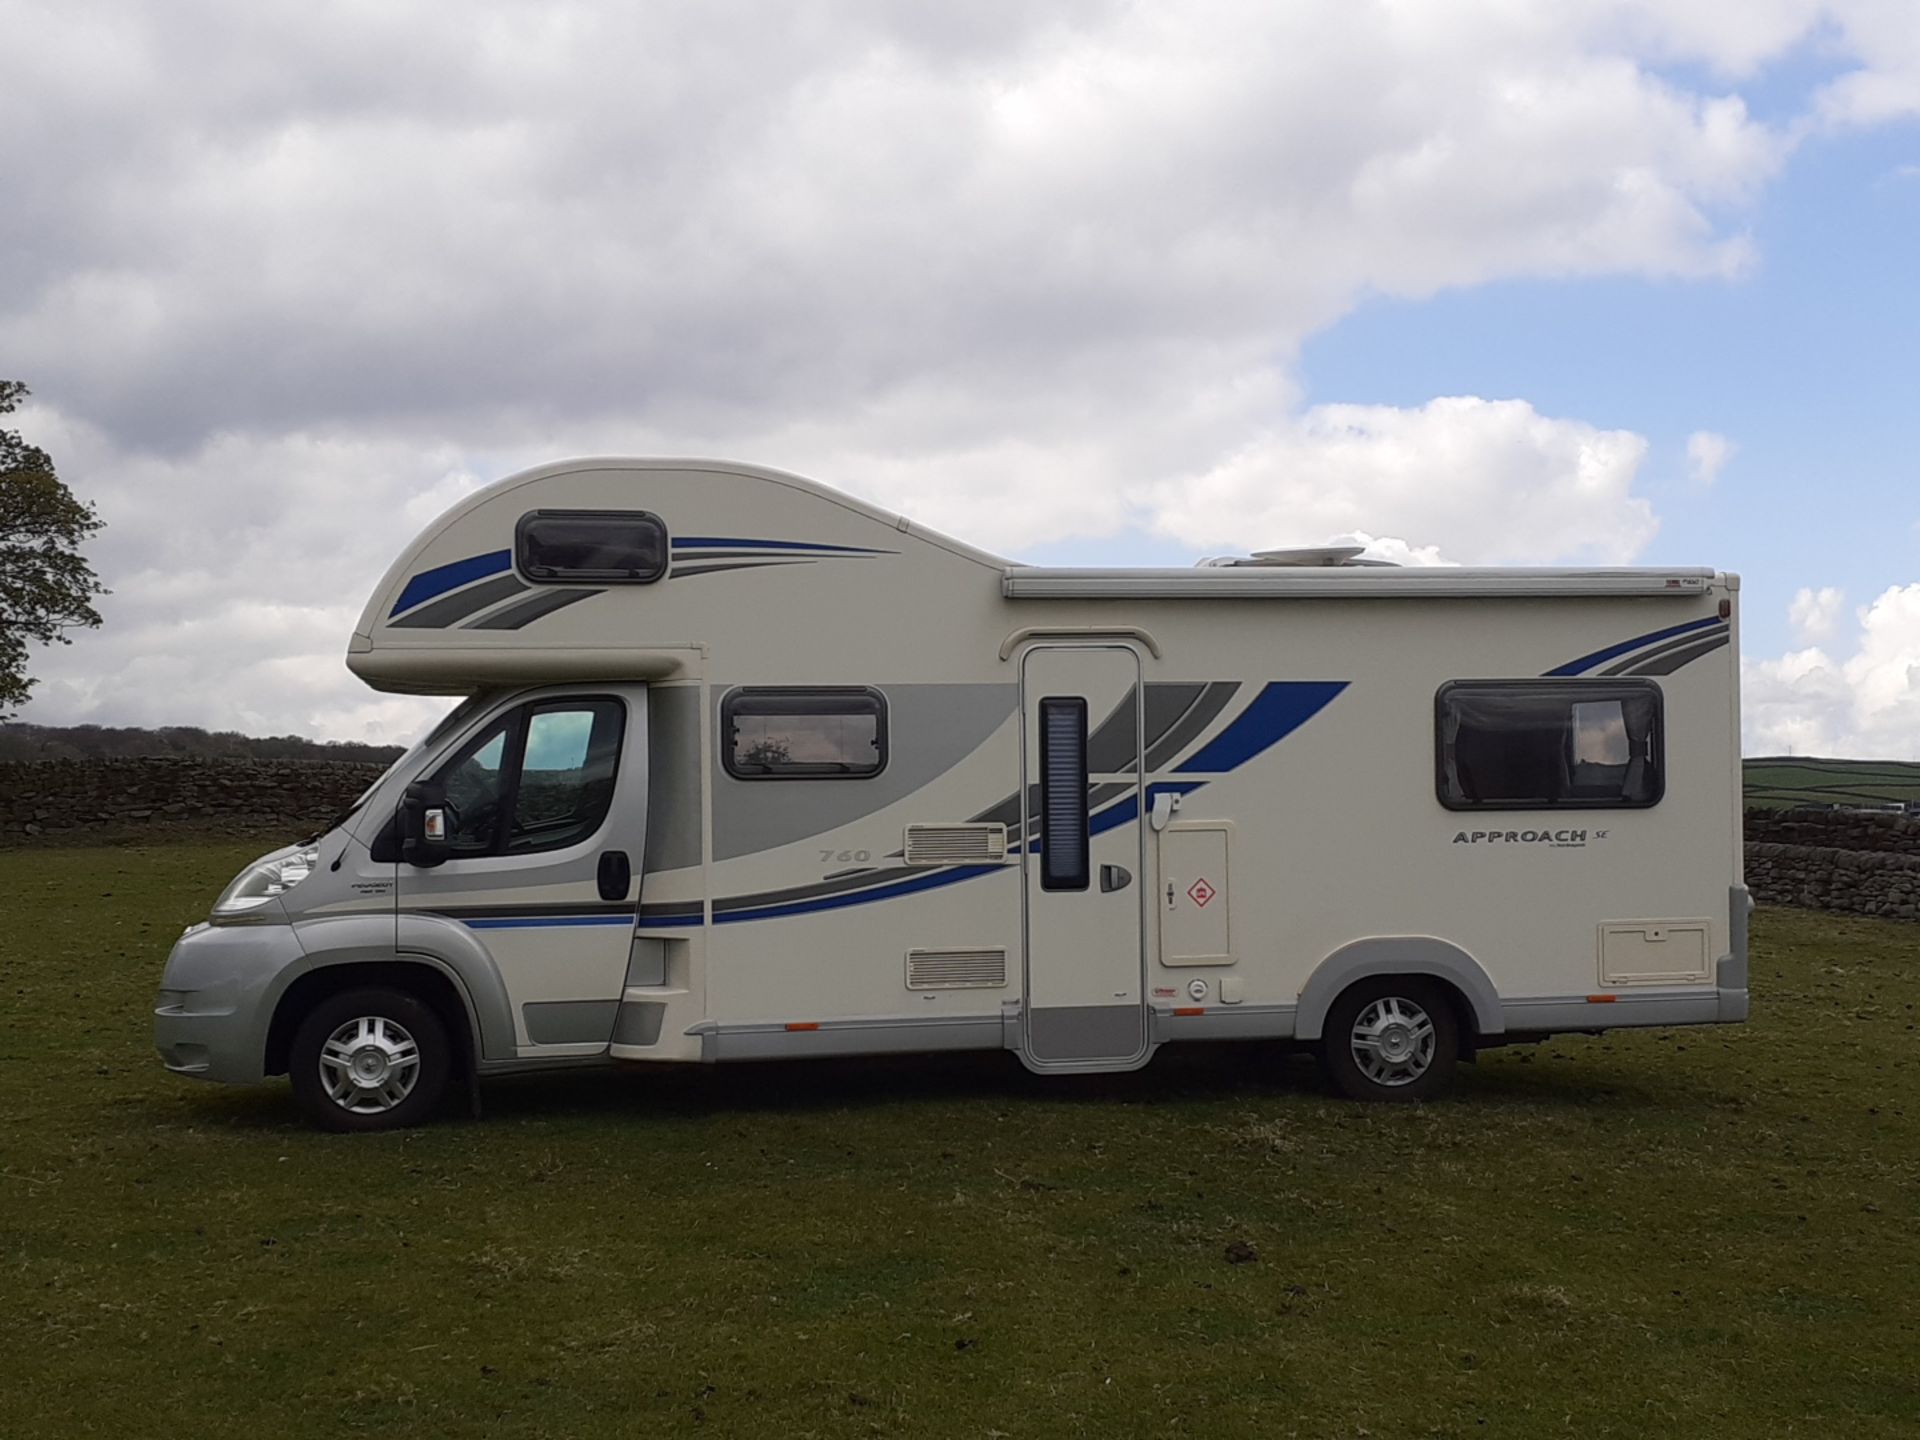 2012 BAILEY APPROACH 760 SE LUXURY 6 BERTH MOTORHOME £10K OF EXTRAS, 30,000 MILES FROM NEW - Image 6 of 31